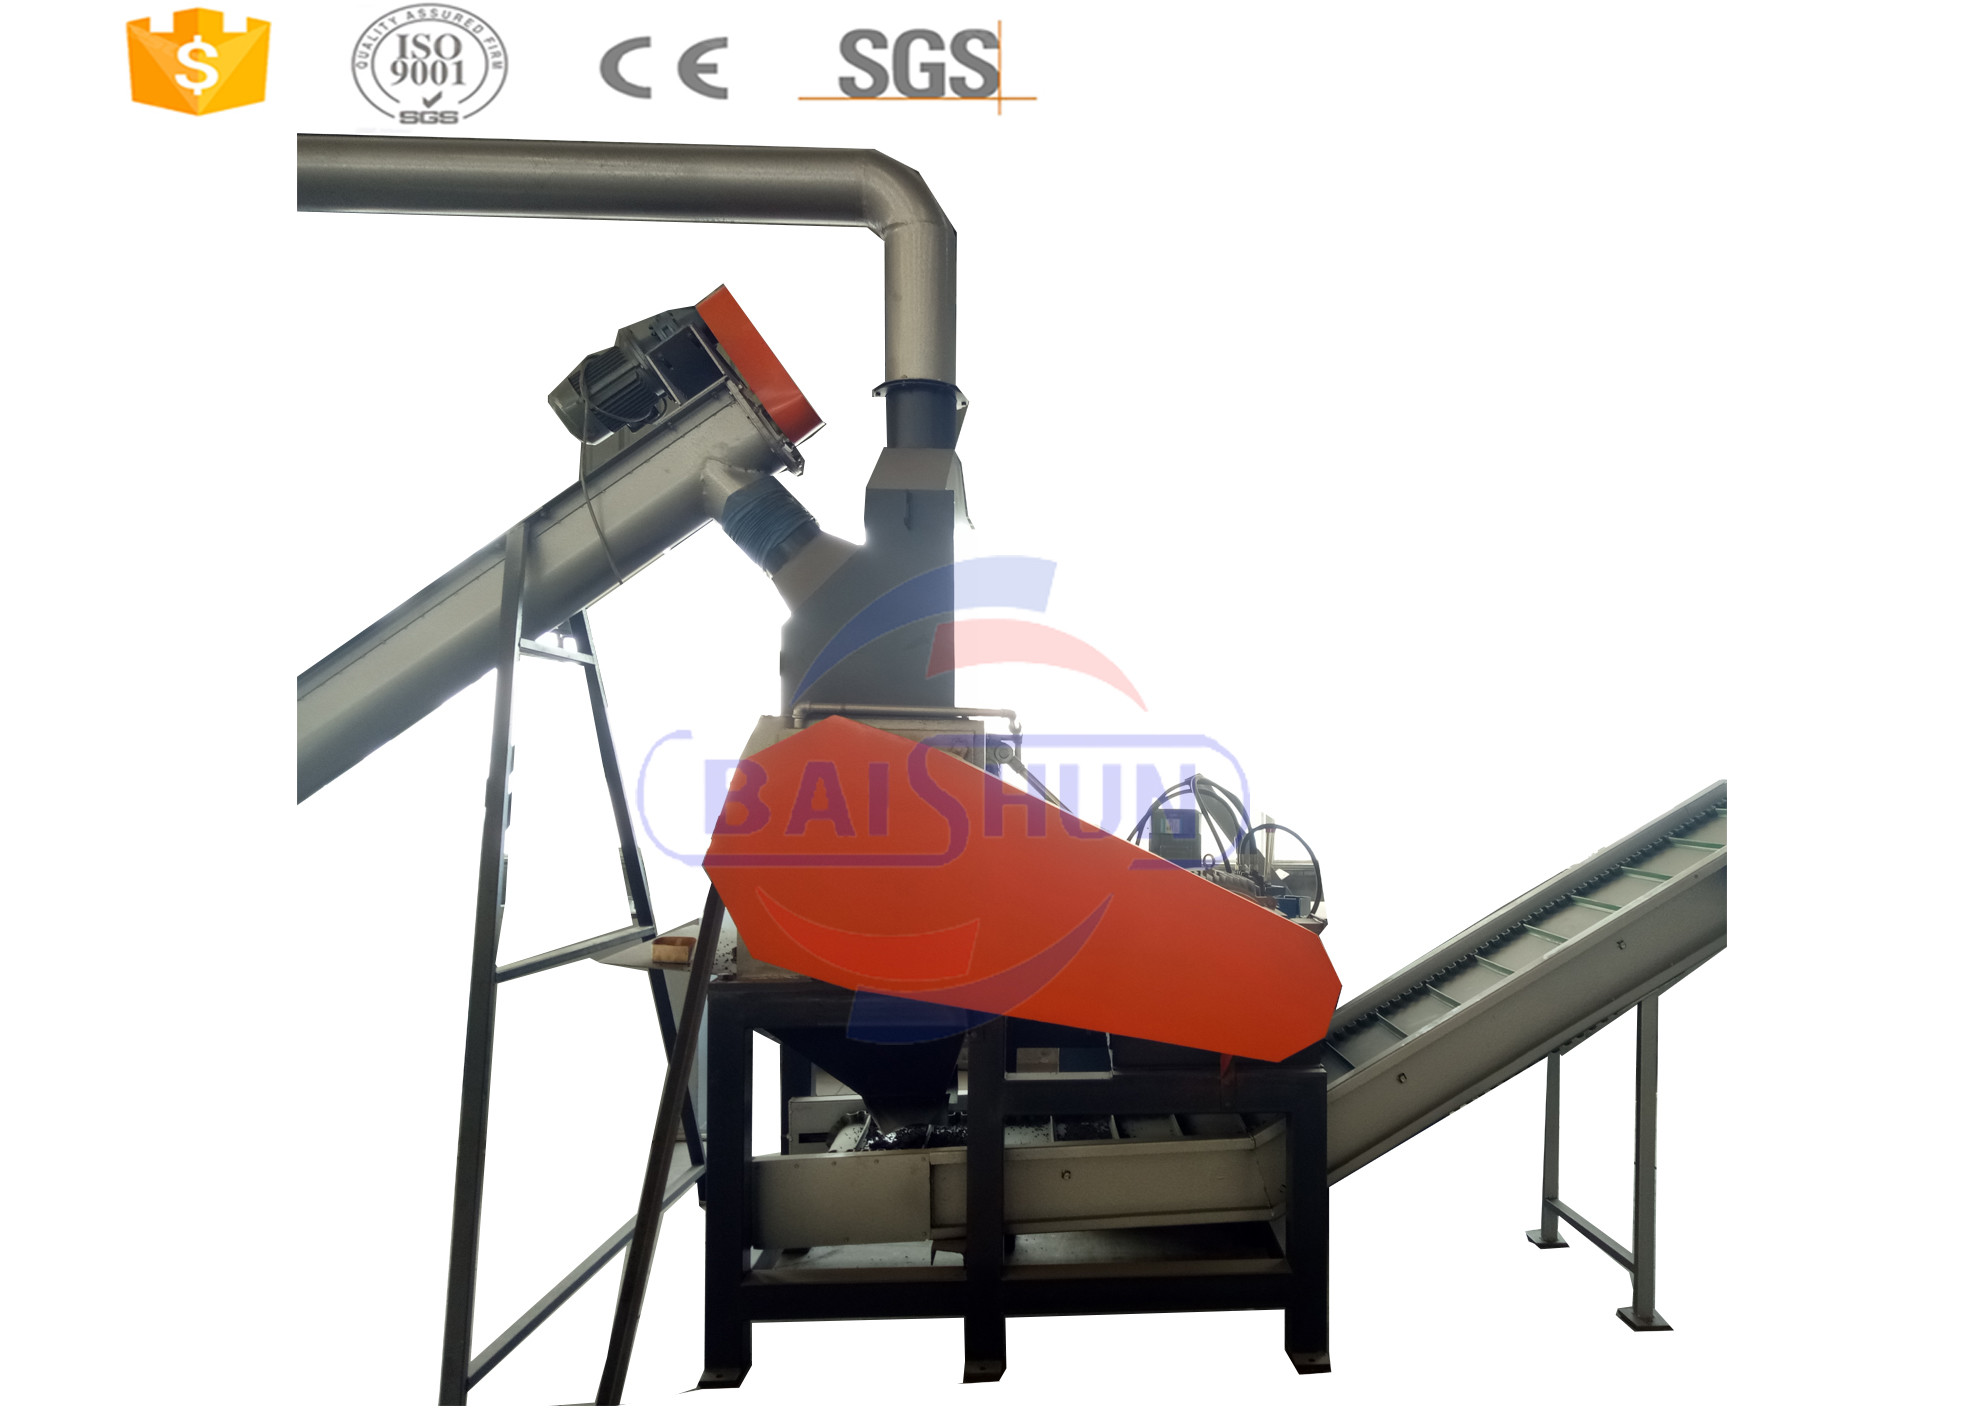  Waste Scrap Tire Recycling Machine / Rubber Waste Tire Recycling Equipment Manufactures